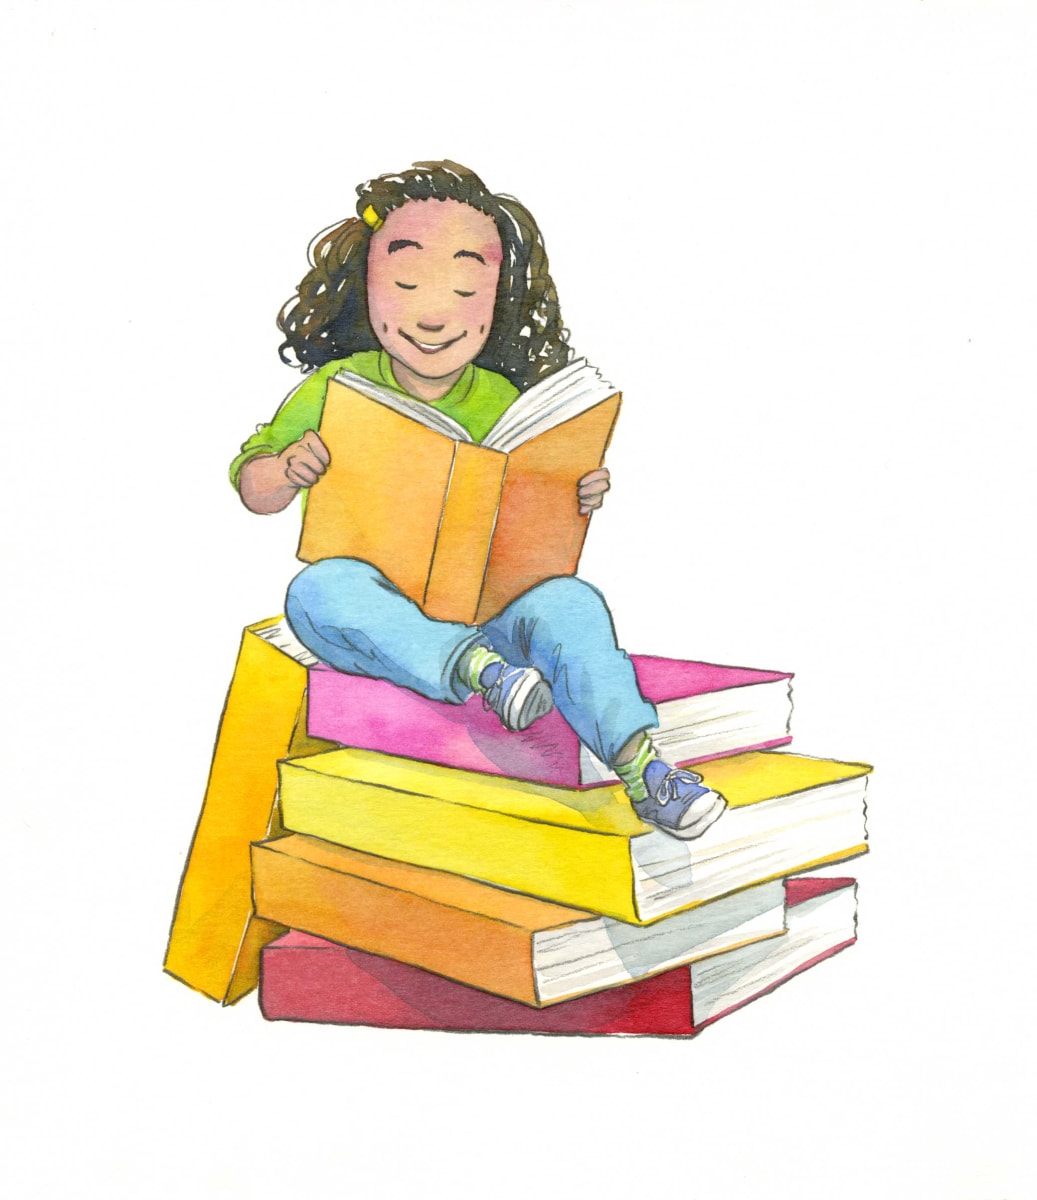 Girl Sitting on Stack of Books  Image: Cover illustration for teaching management kit, Scholastic Teaching Resources ©Leanne Franson